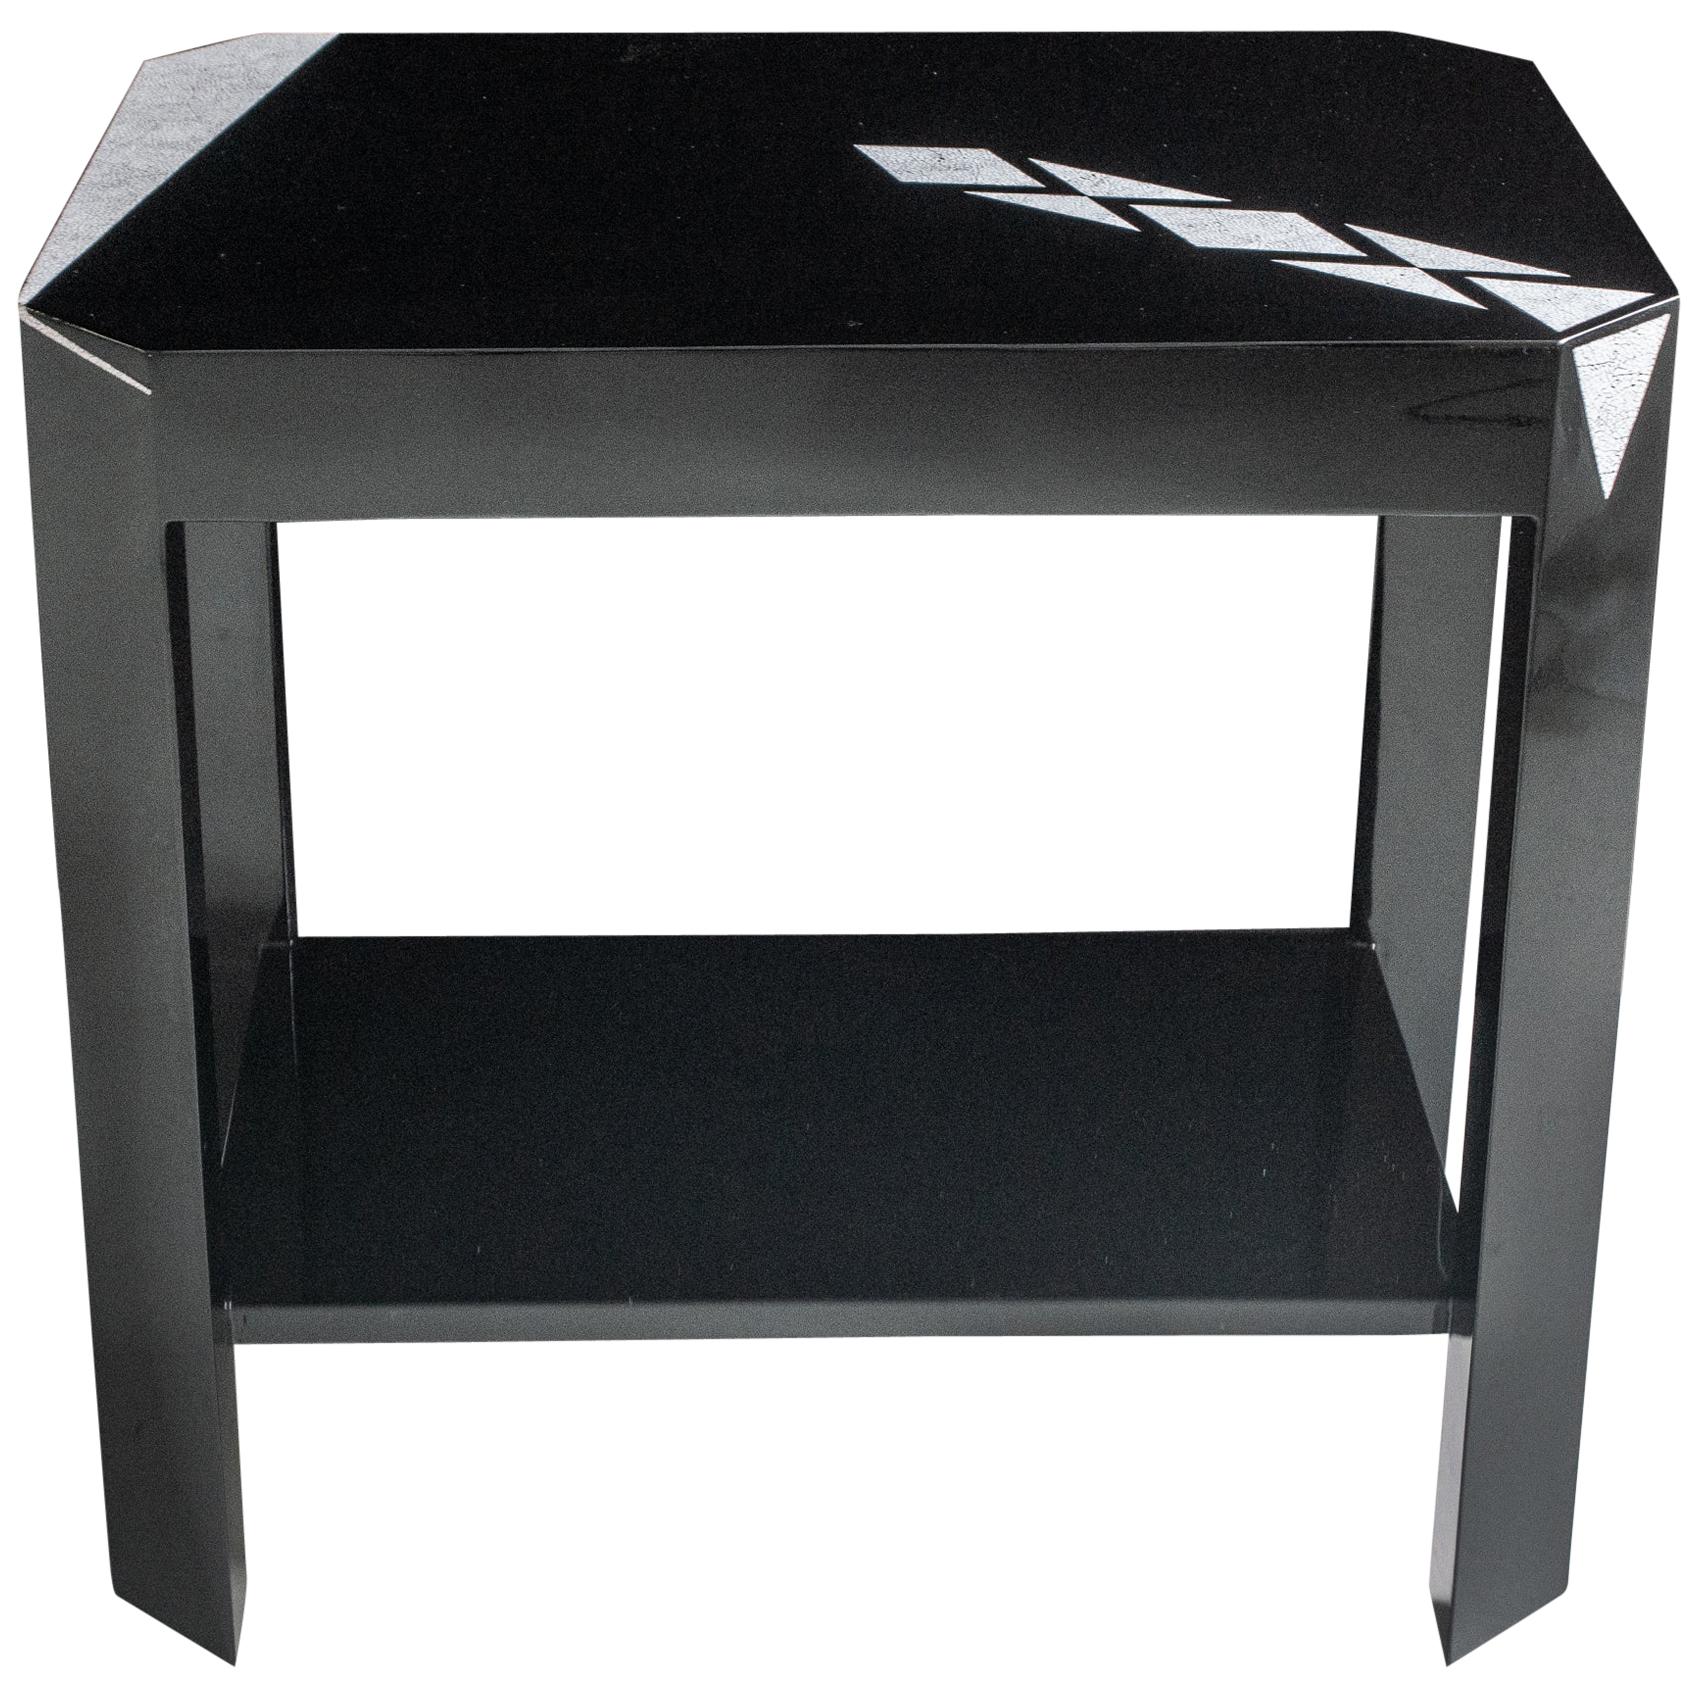 Double Level Side Tables in with Eggshell